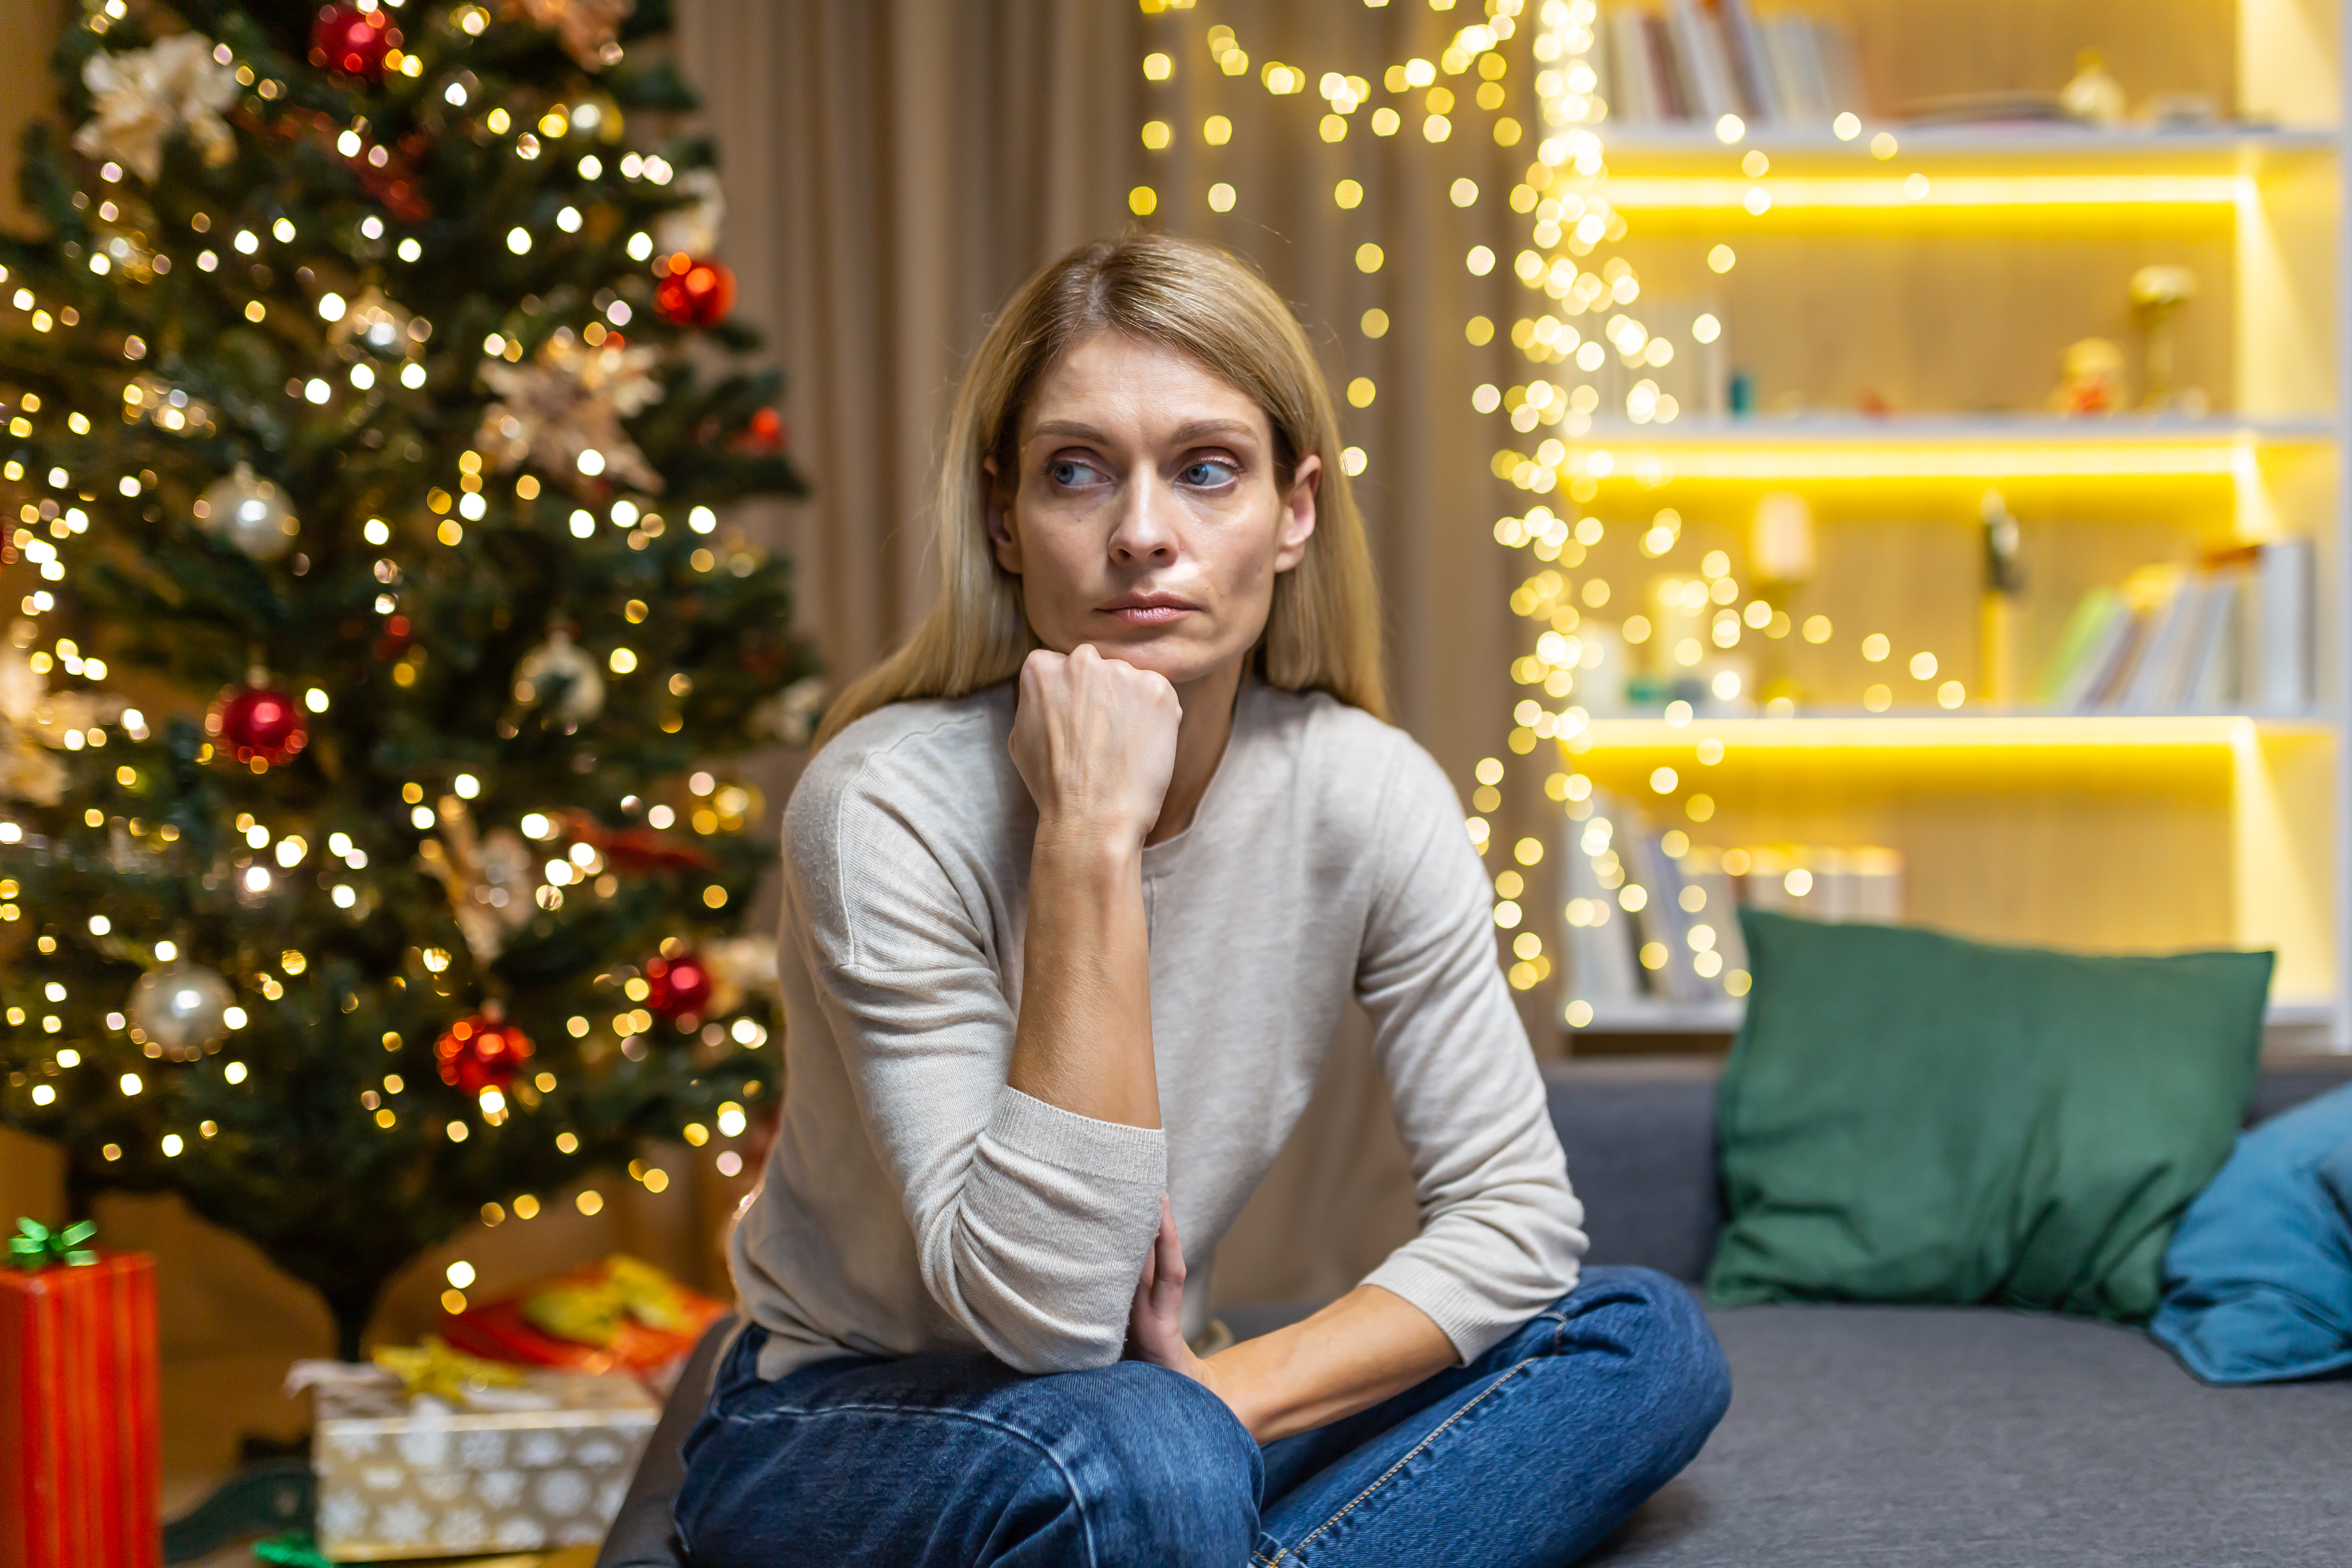 A depressed woman sitting near a Christmas tree at home | Source: Getty Images